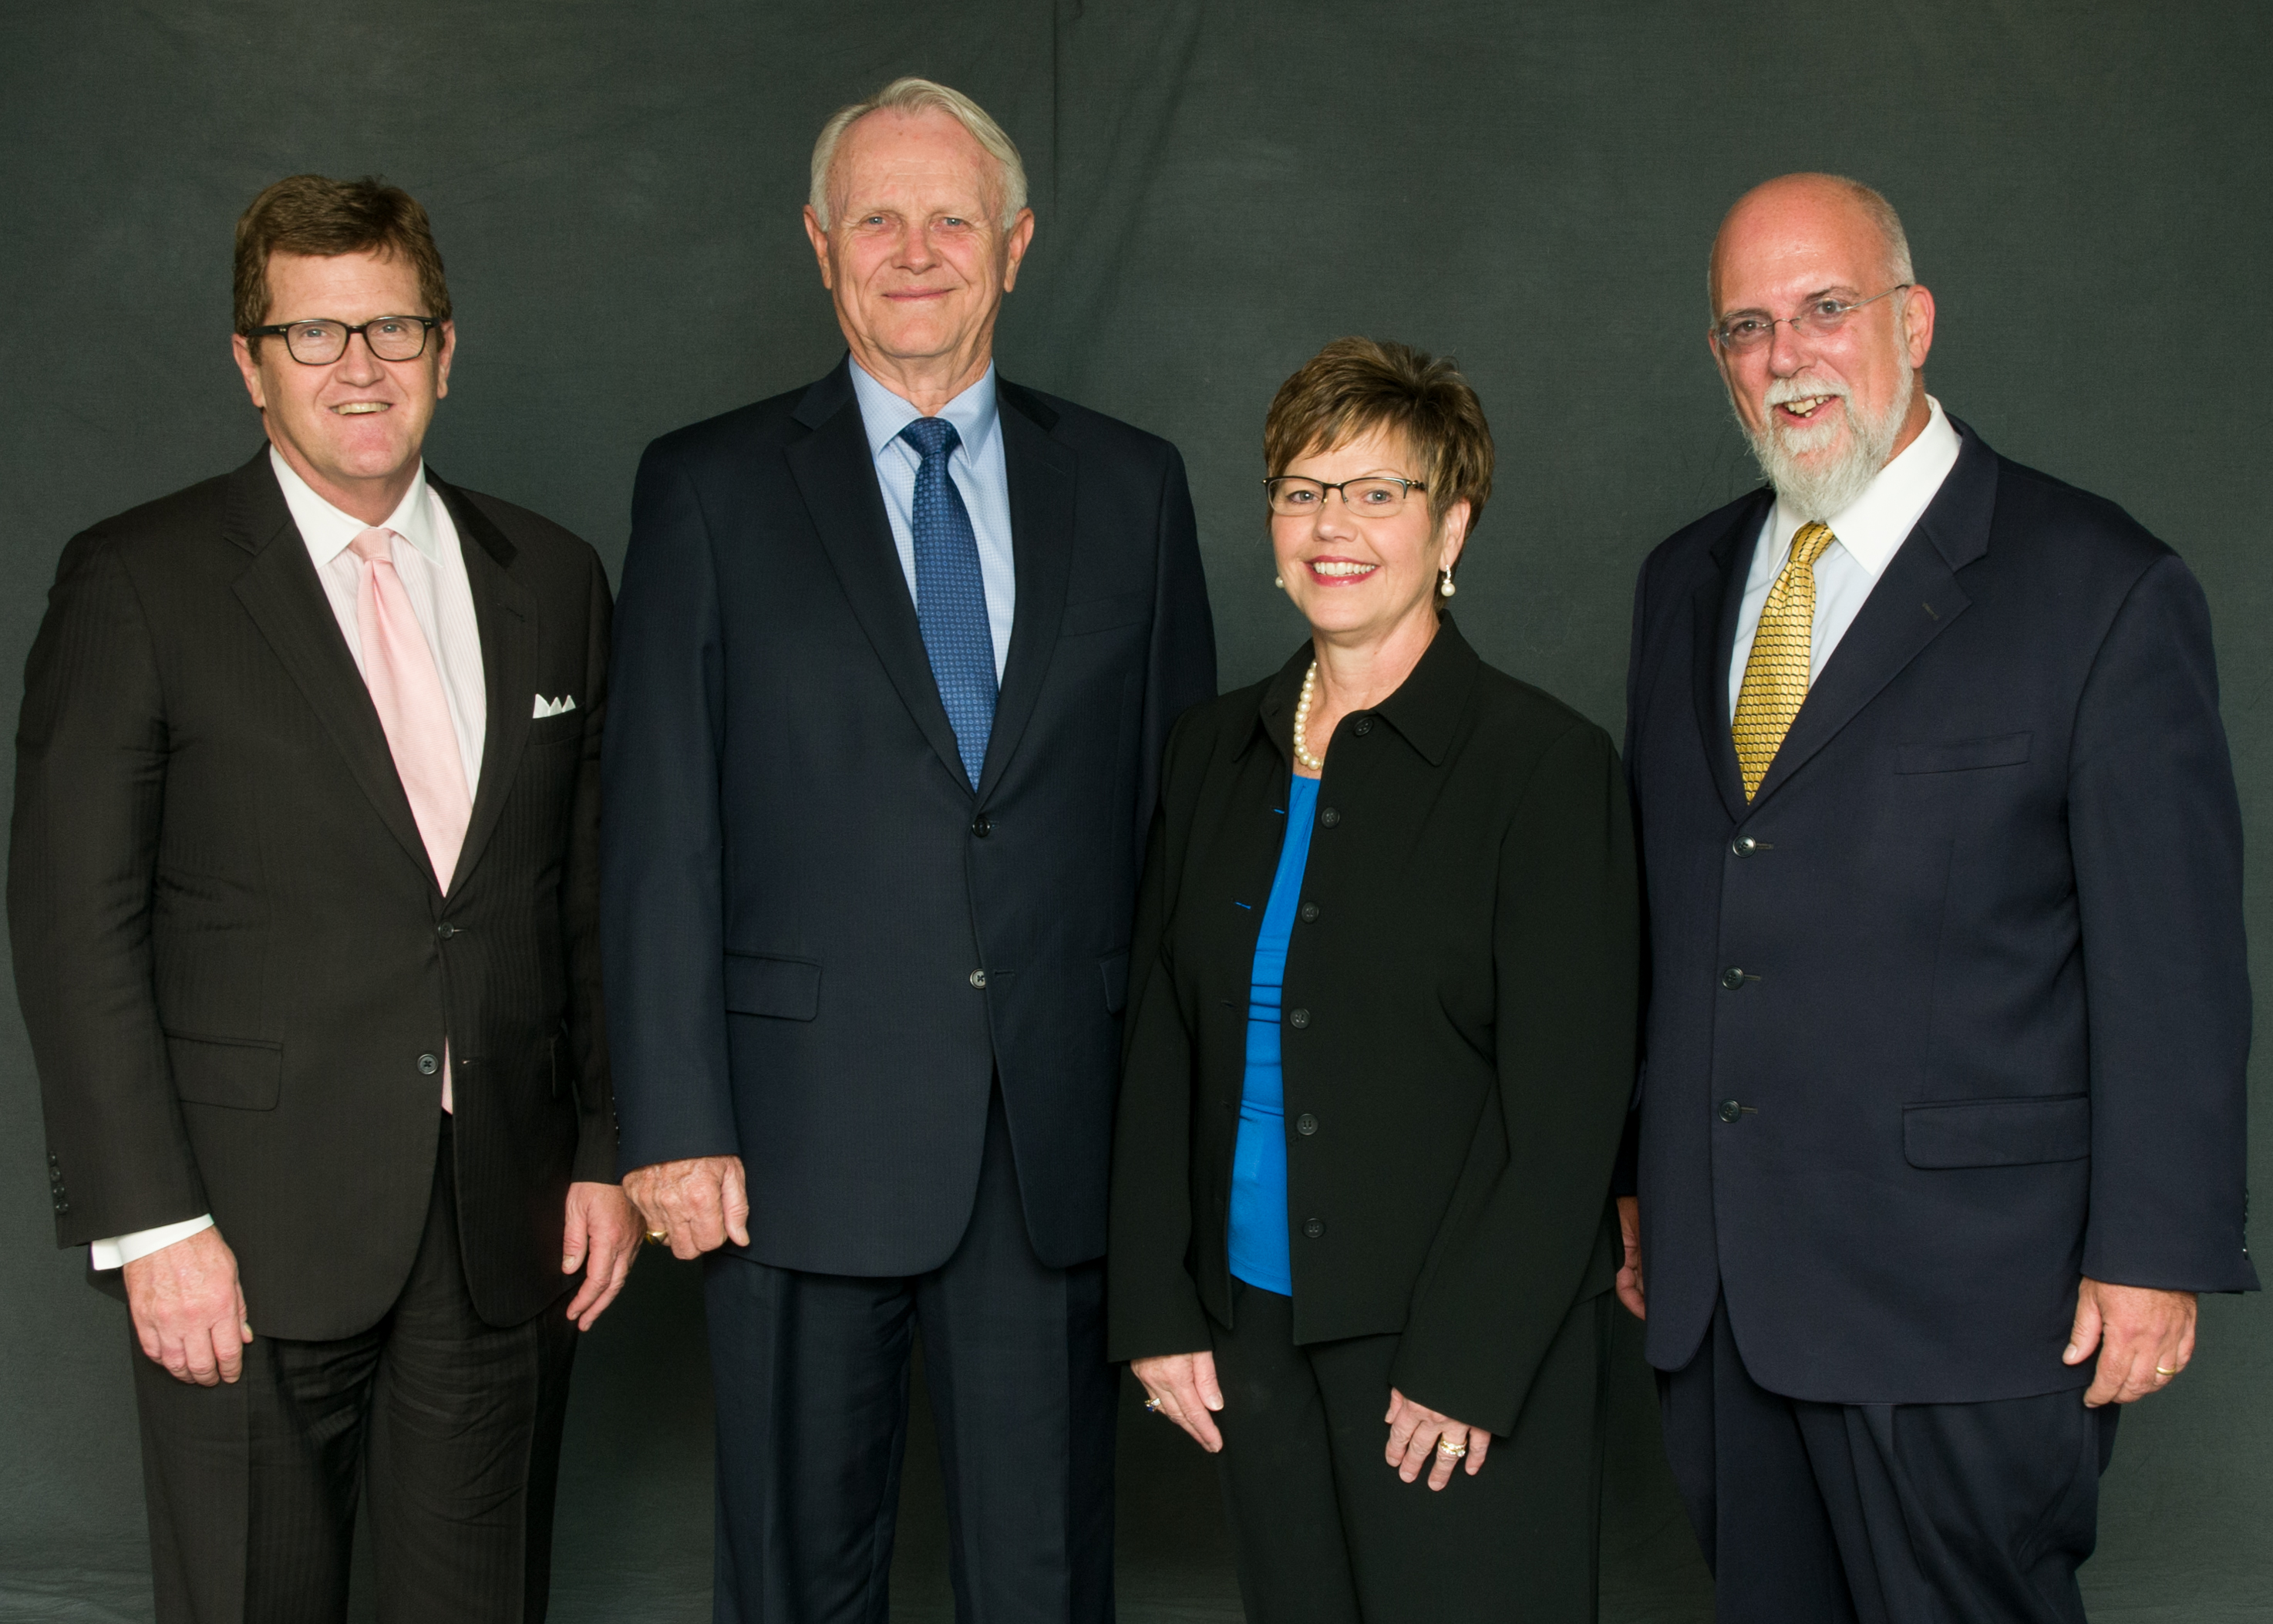 Left to right: BVU President Fred Moore; Harry and Molly Stine; Dr. James Hampton, professor of biology at BVU and chair for the endowment